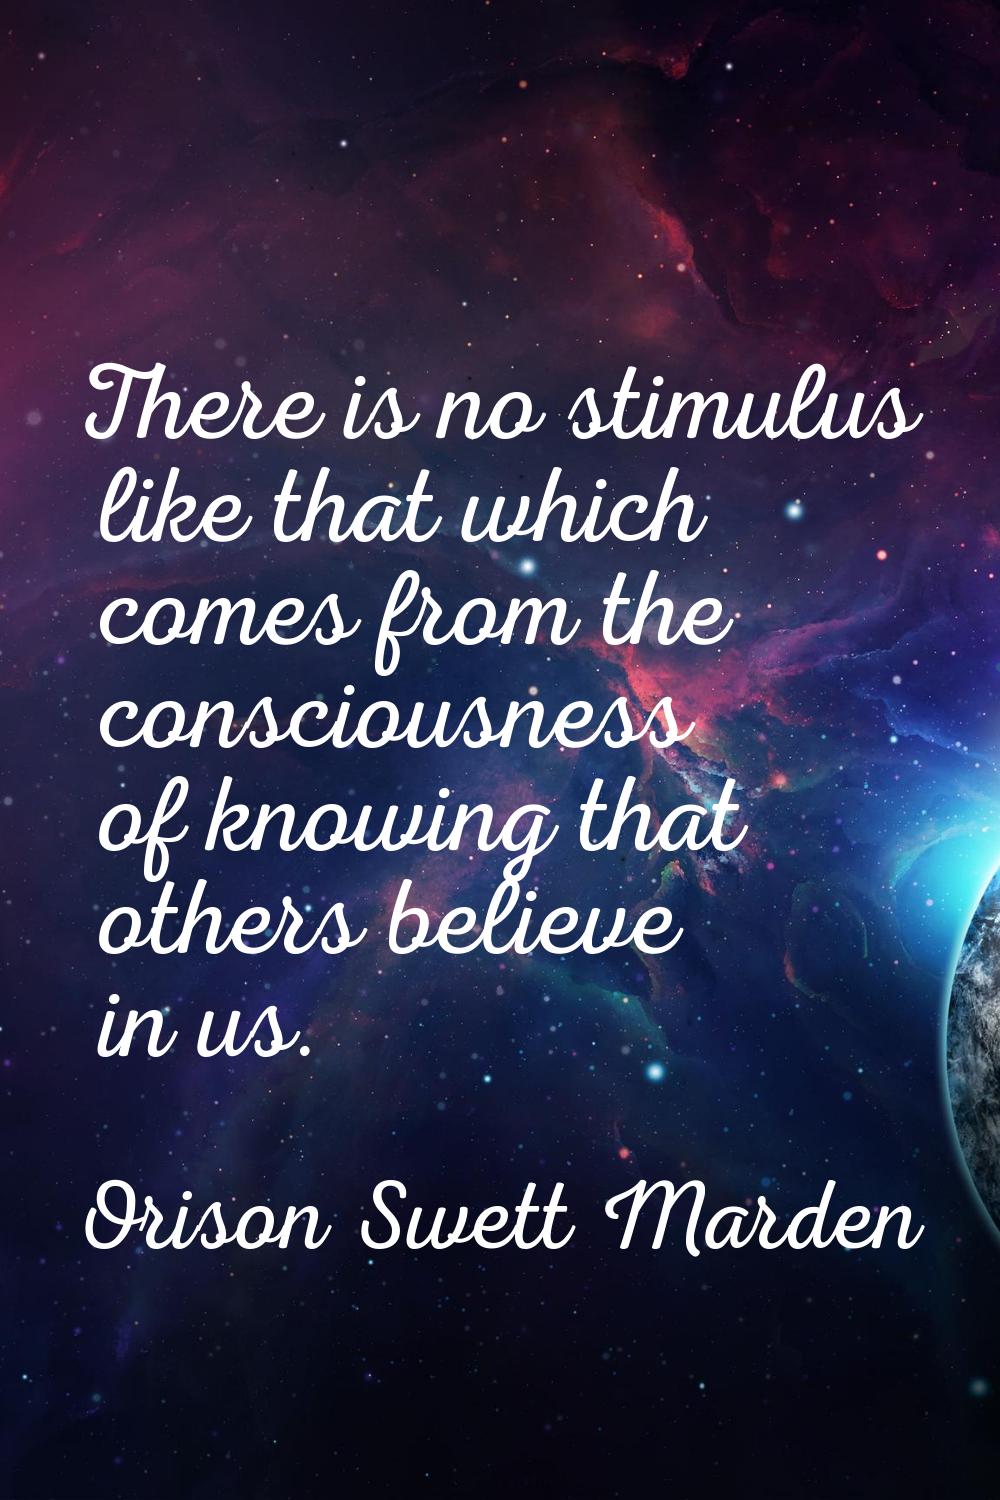 There is no stimulus like that which comes from the consciousness of knowing that others believe in